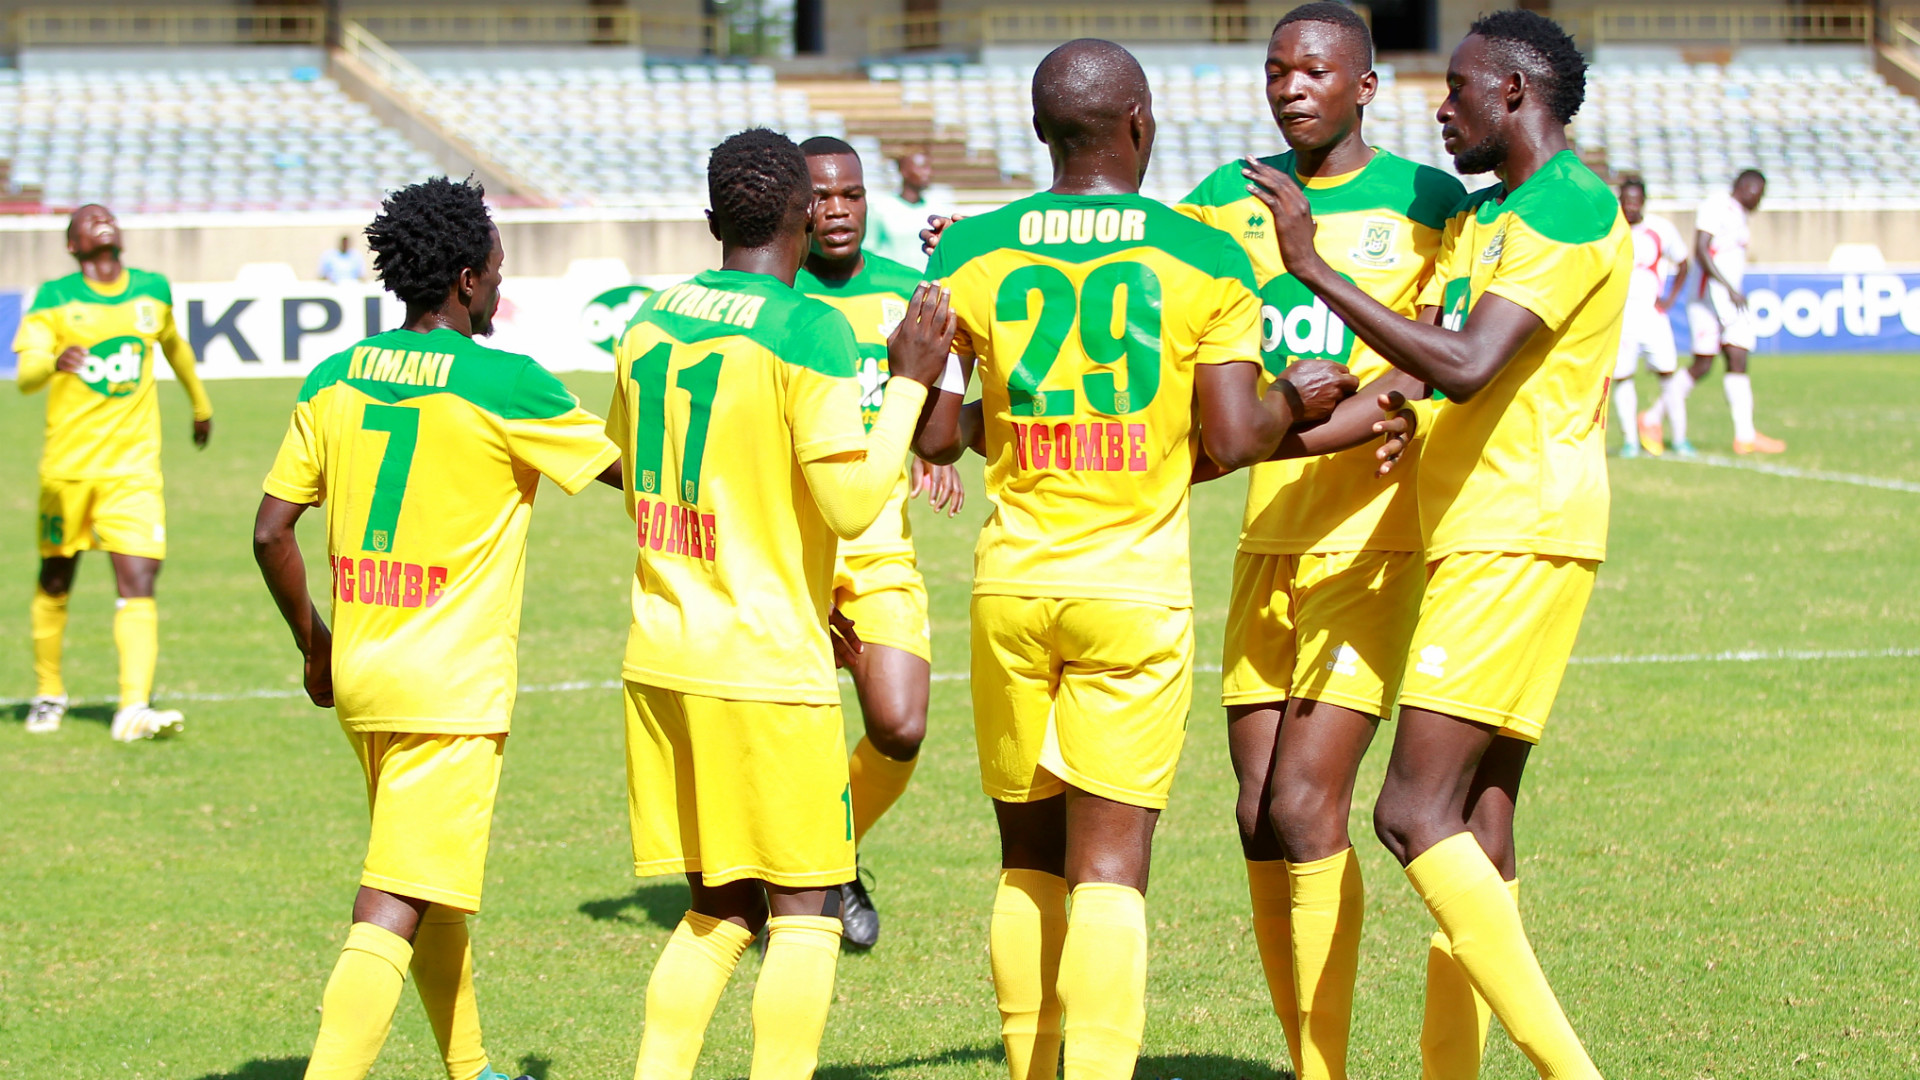 Chris Ochieng is the difference for Mathare United against Chemelil Sugar